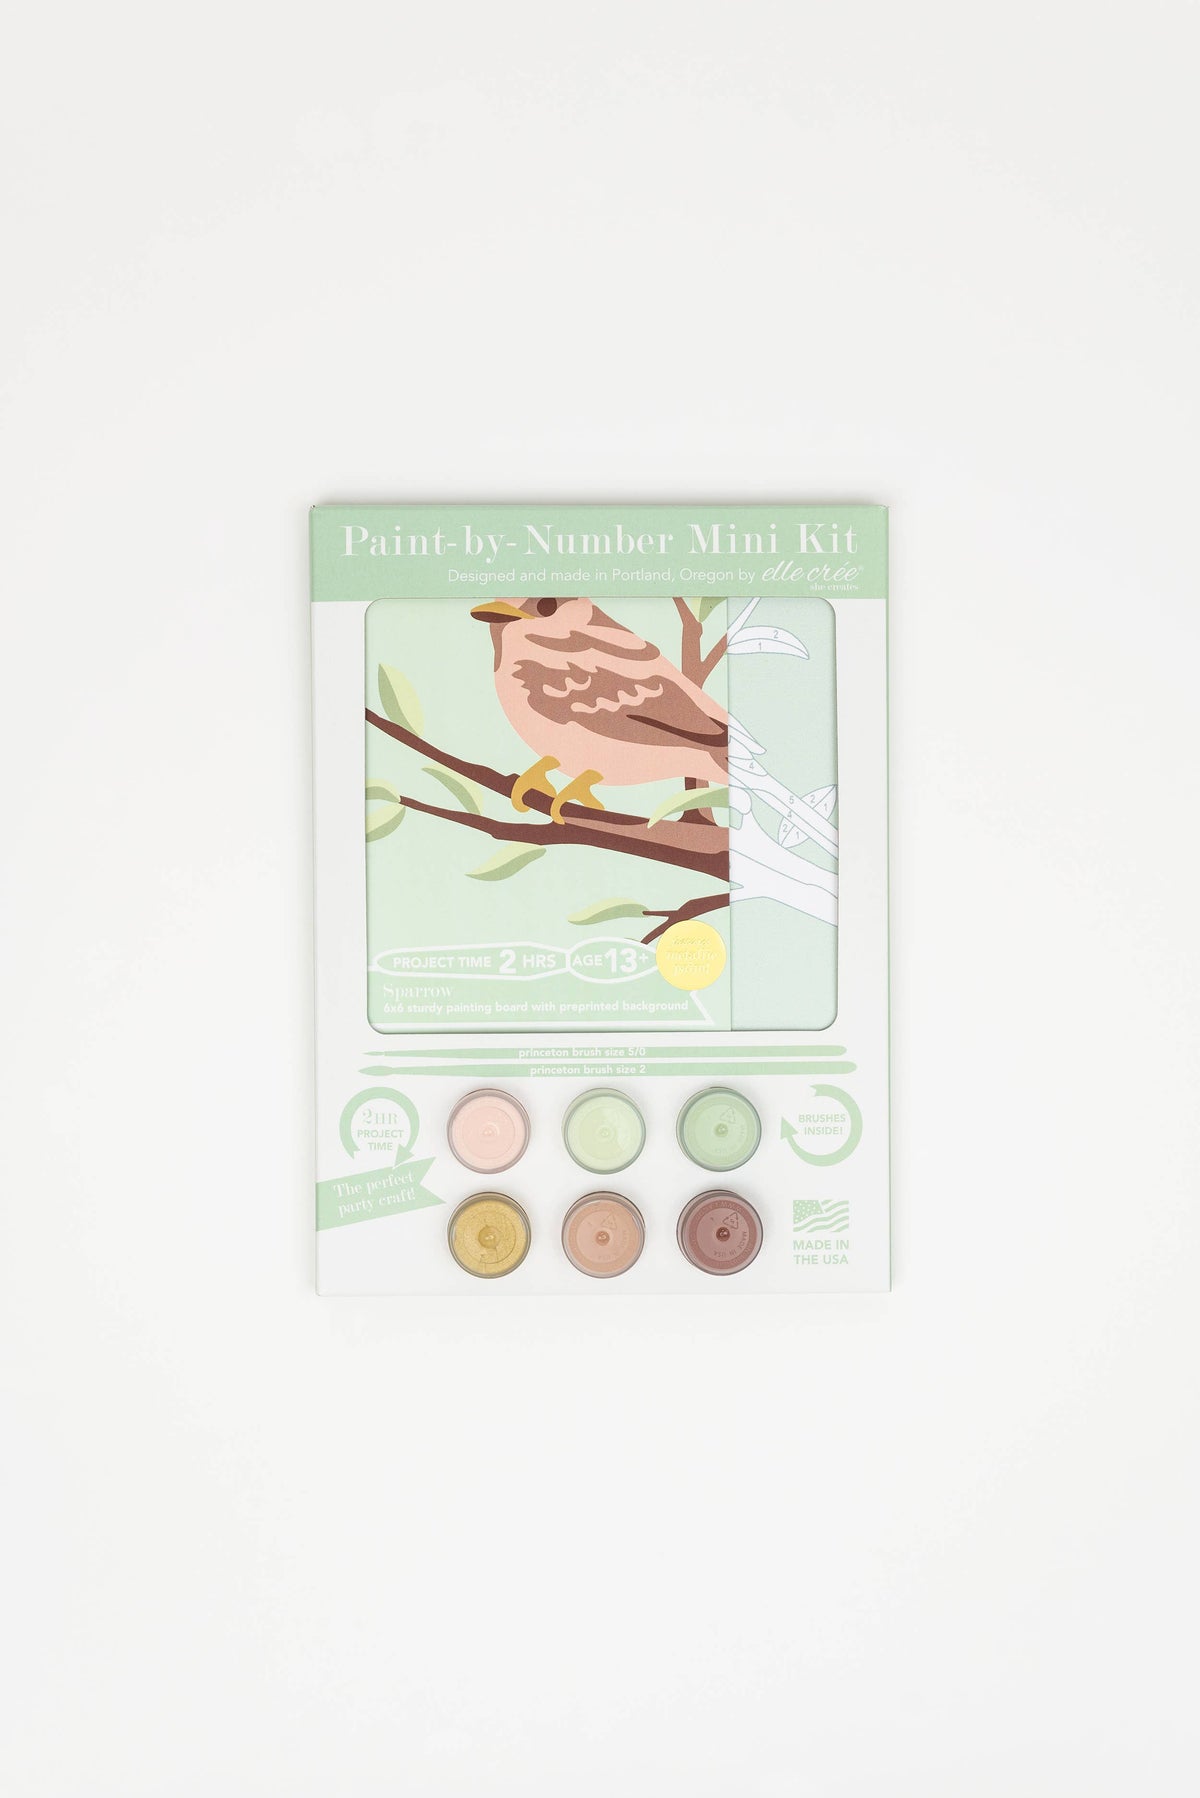 Sparrow MINI Paint-by-Number Kit